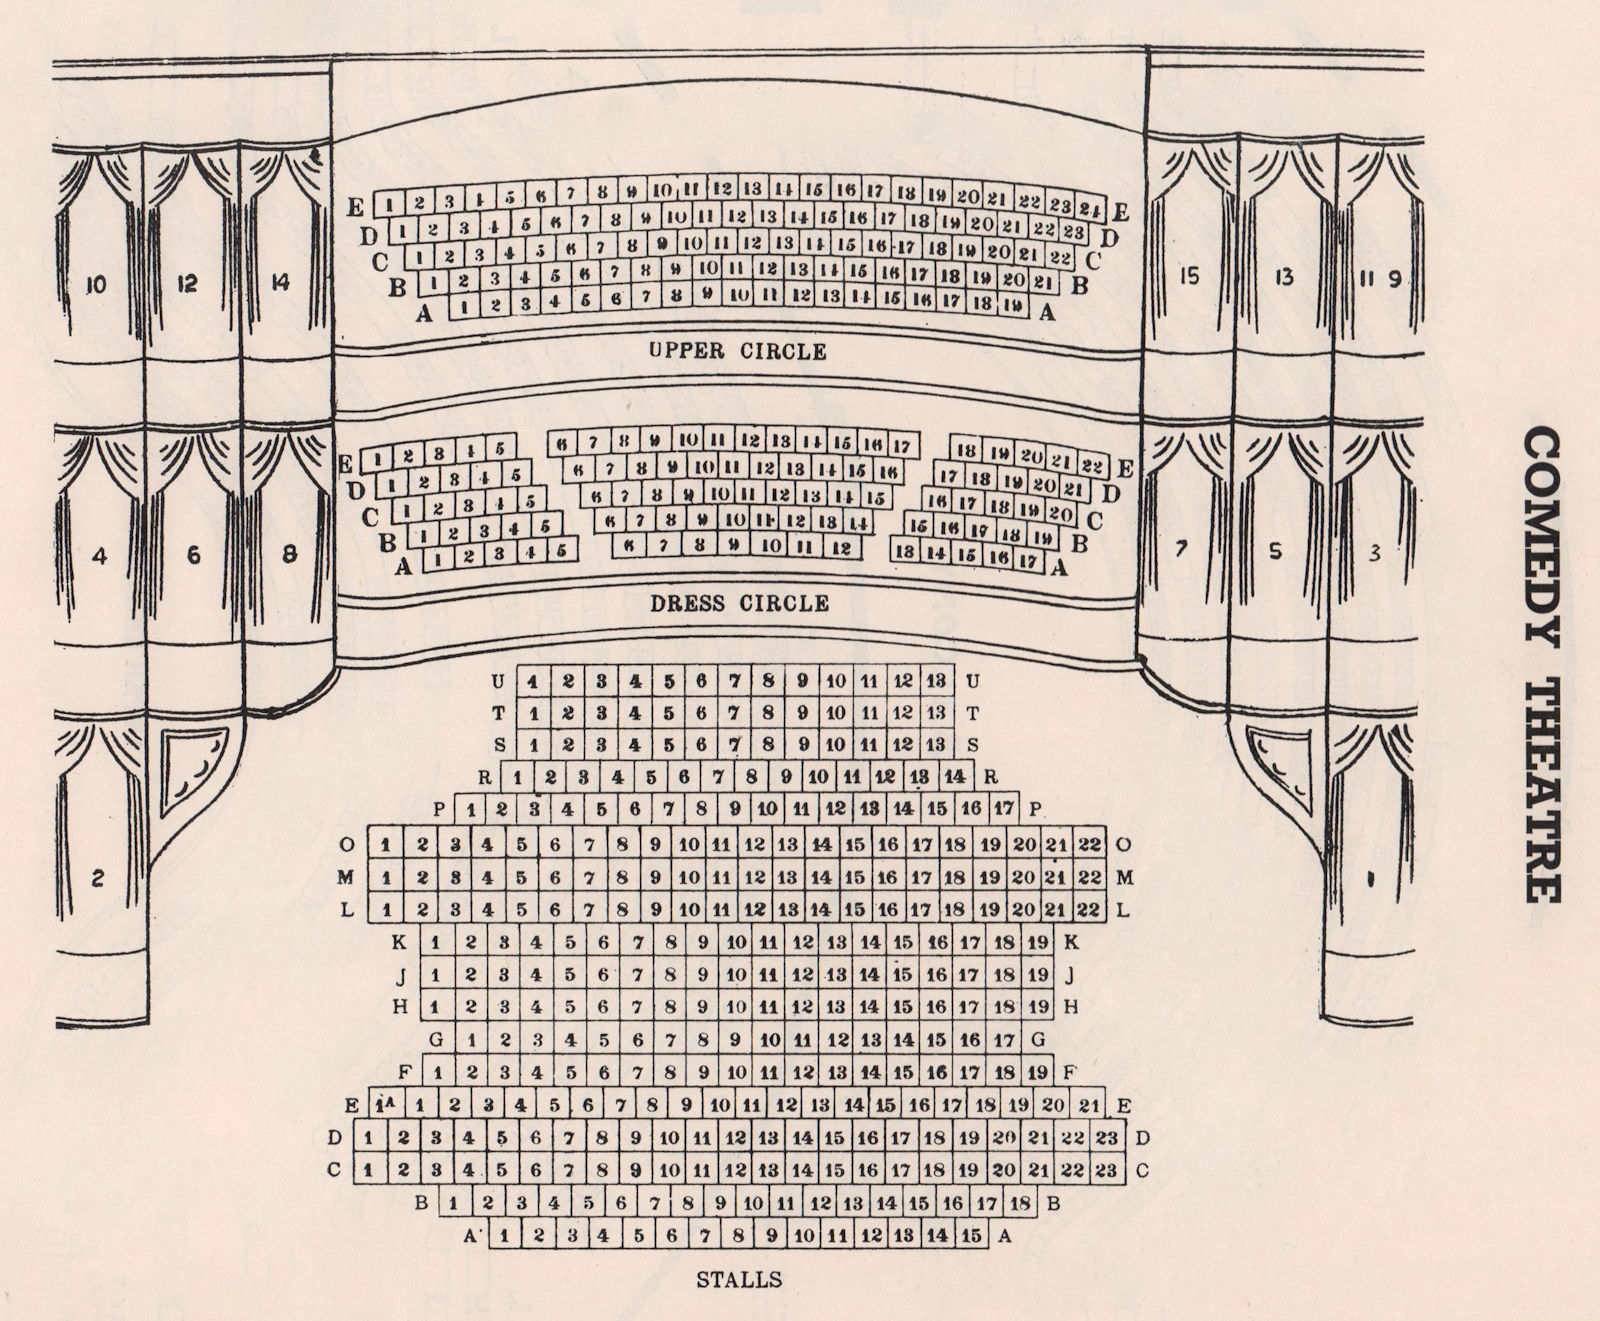 COMEDY THEATRE. Seating plan. London West End. Now Harold Pinter Theatre 1937